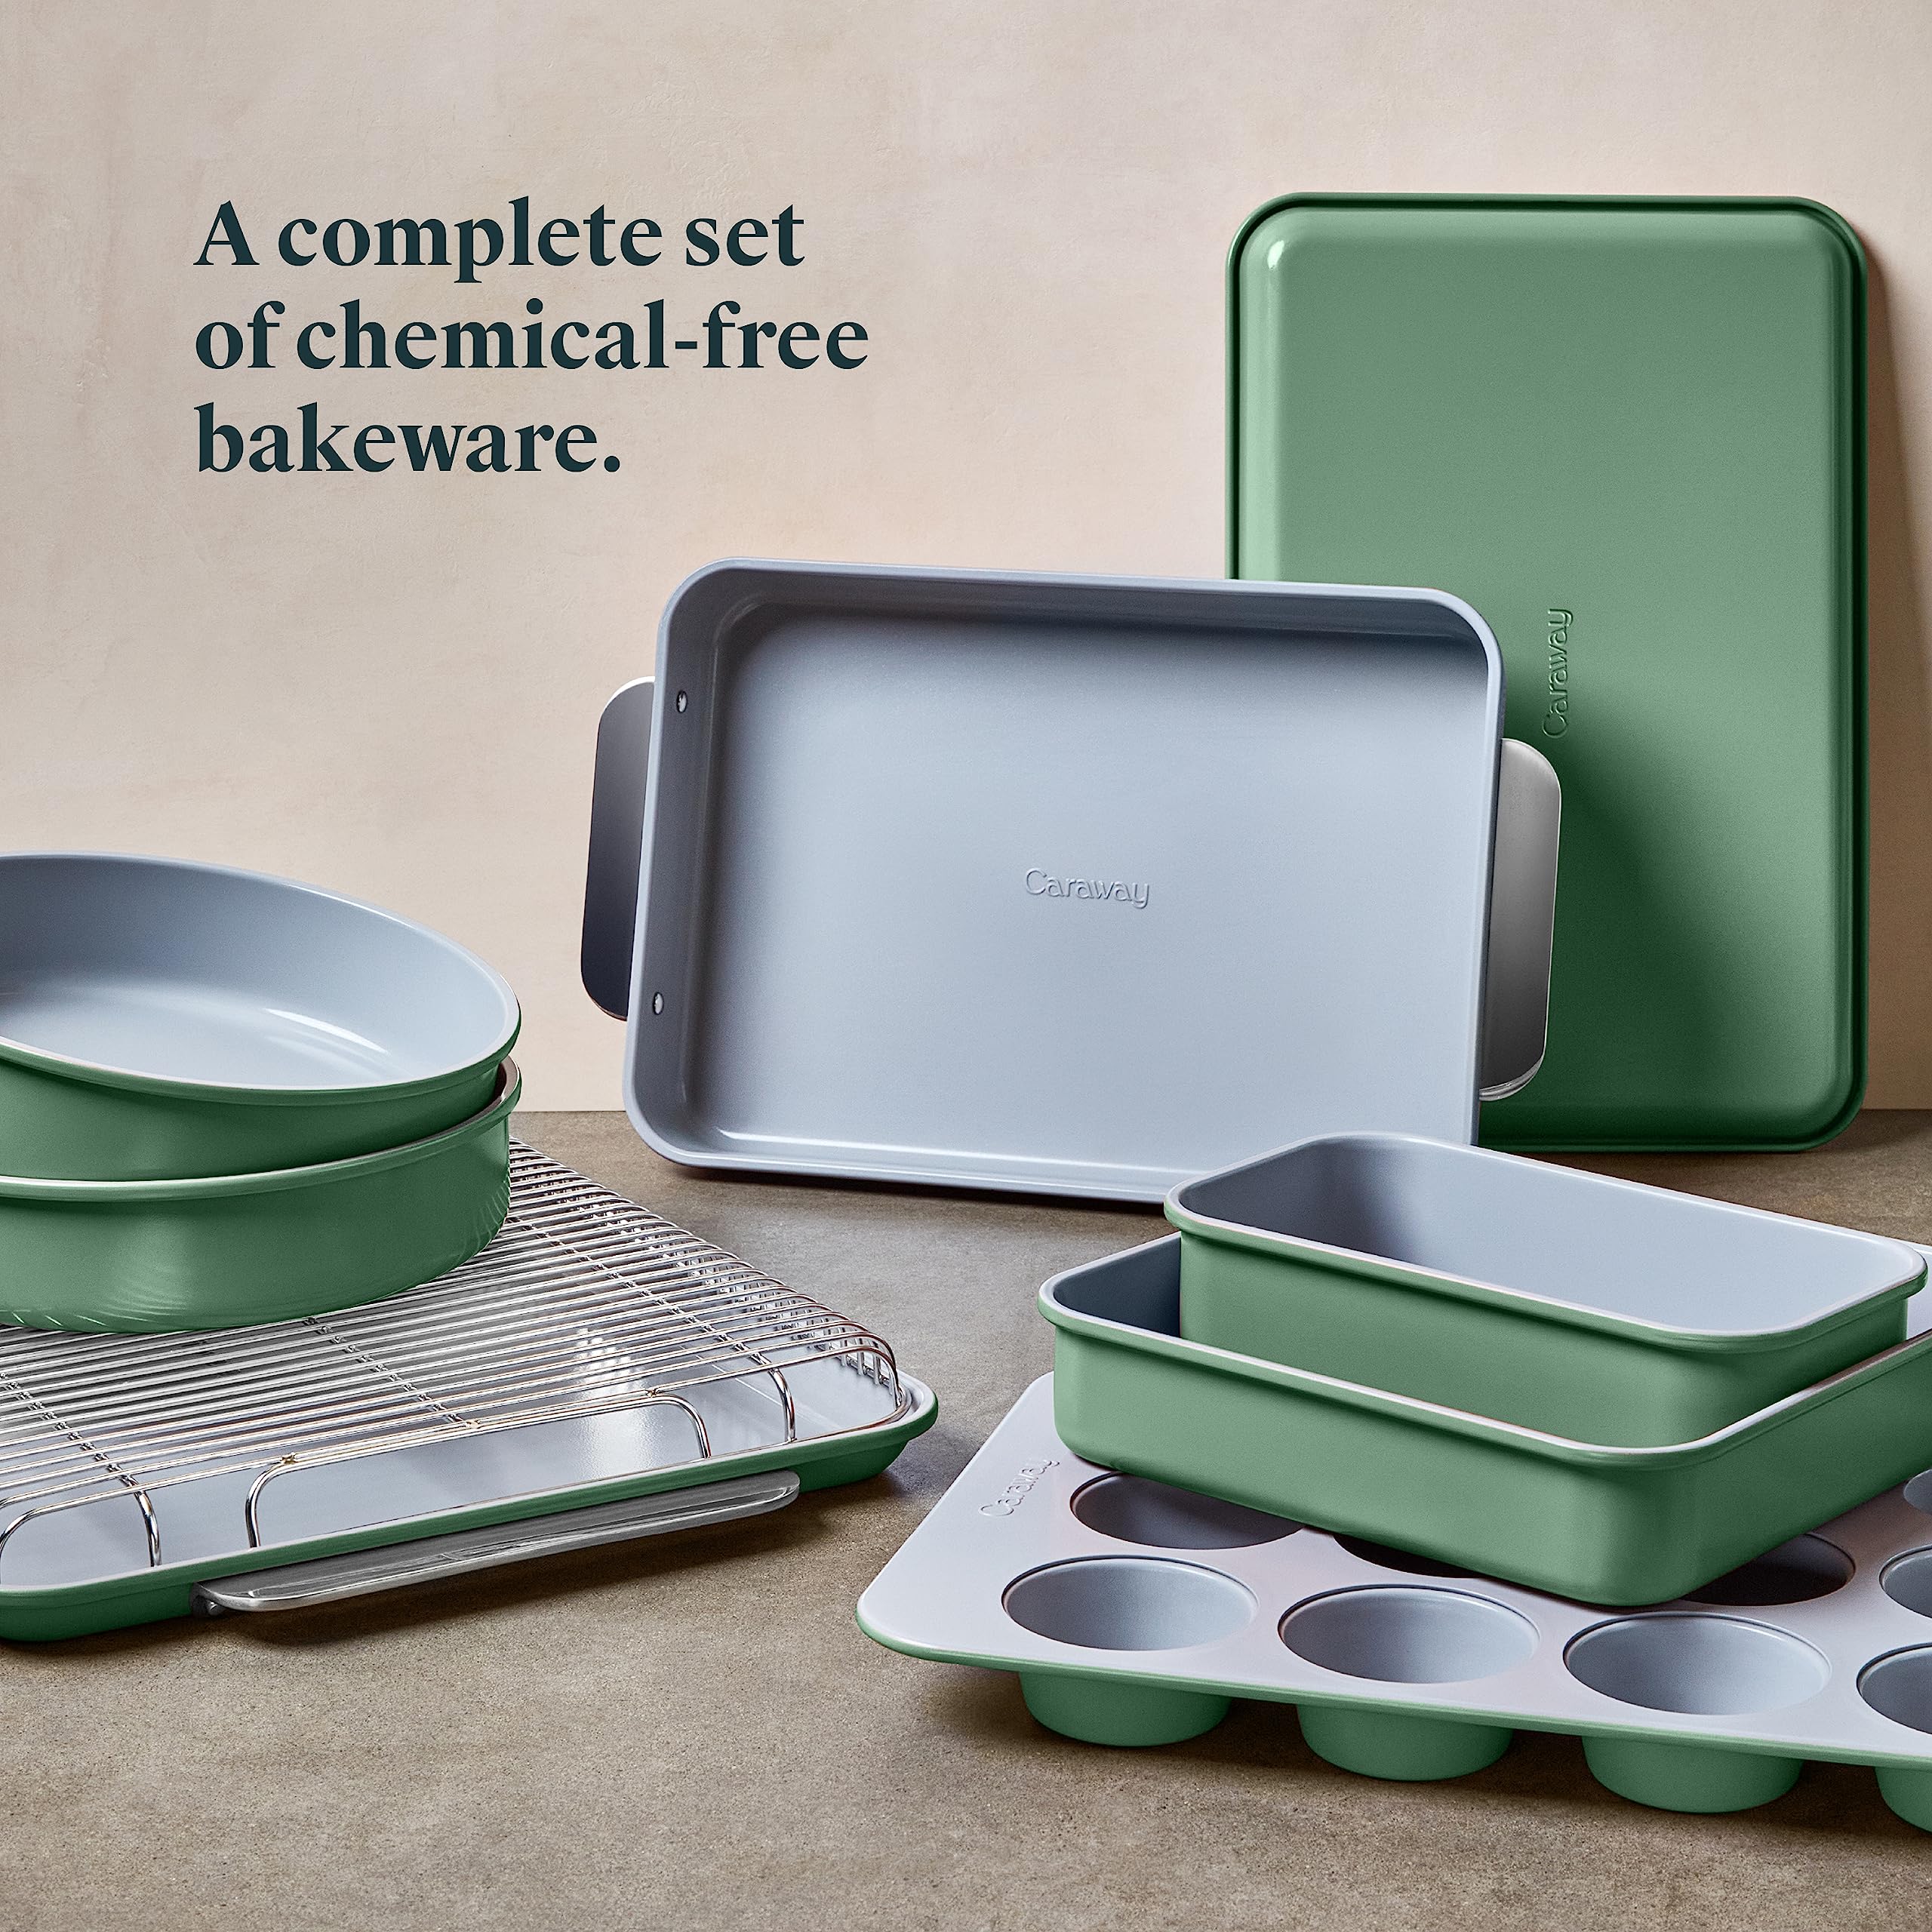 Caraway Nonstick Ceramic Bakeware Set (11 Pieces) - Baking Sheets, Assorted Baking Pans, Cooling Rack, & Storage - Aluminized Steel Body - Non Toxic, PTFE & PFOA Free - Sage